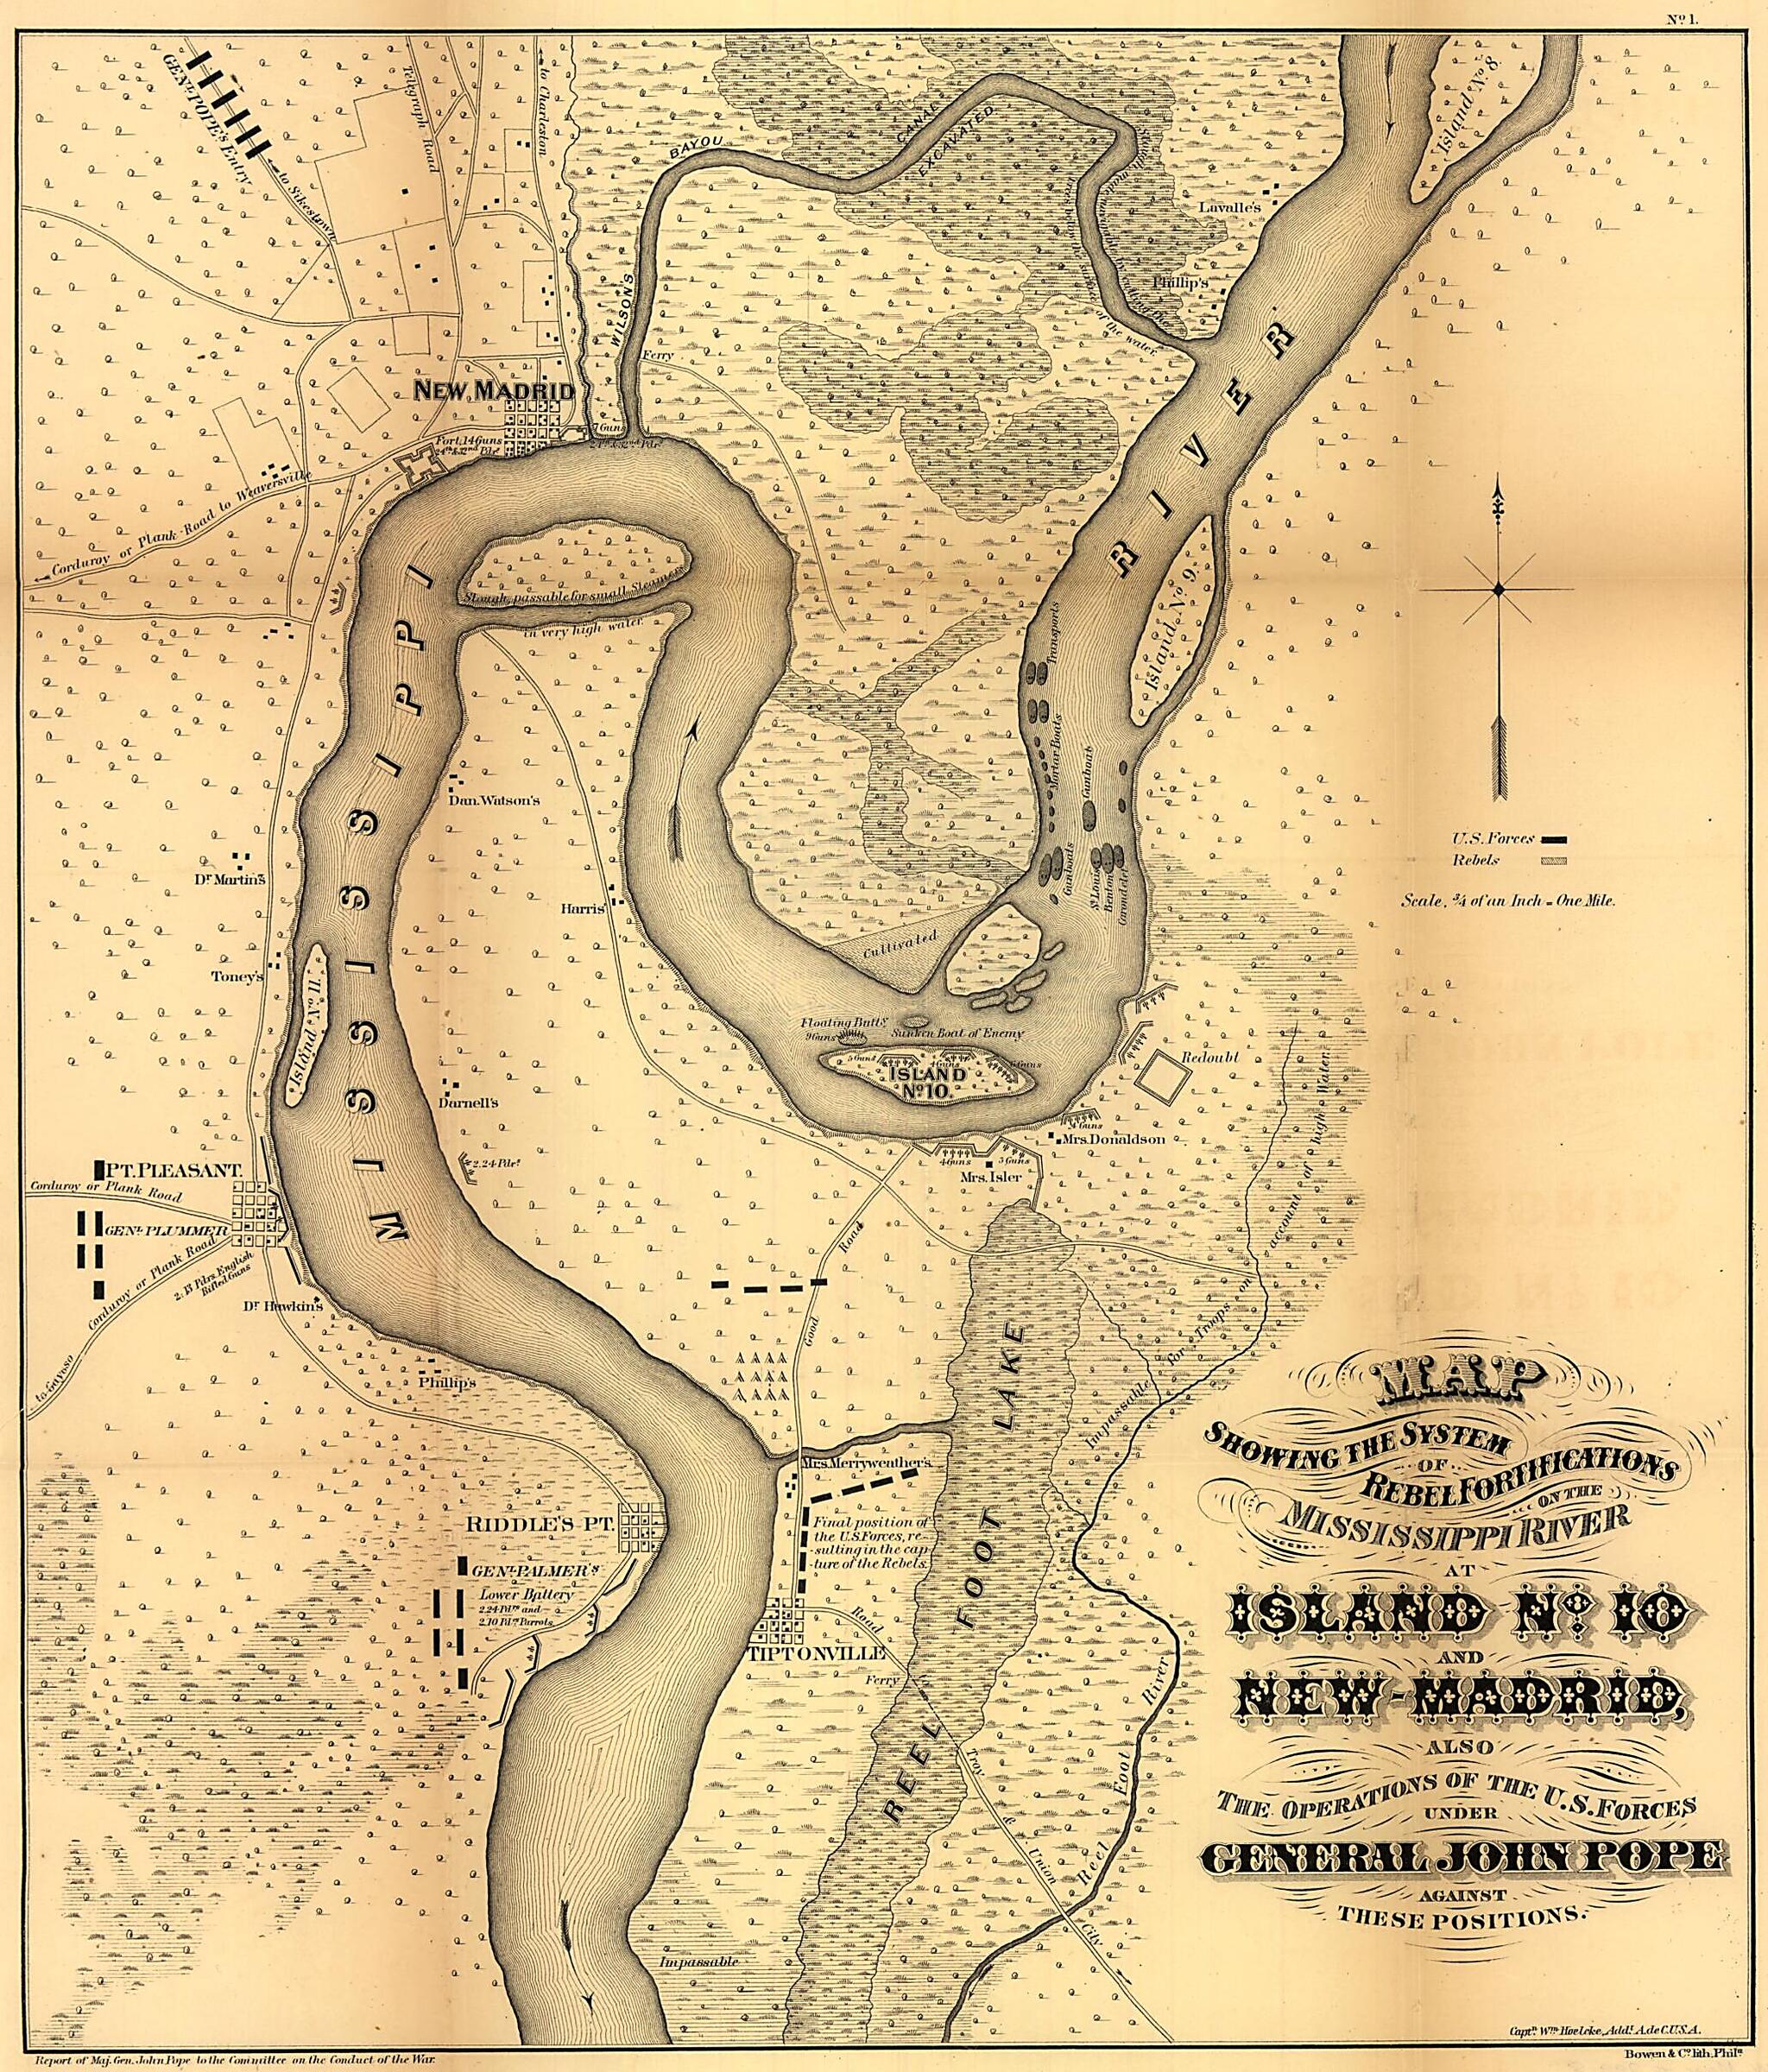 This old map of Map Showing the System of Rebel Fortifications On the Mississippi River at Island No. 10 and New Madrid, Also the Operations of the U.S. Forces Under General John Pope Against These Positions from 1862 was created by Wm Hoelcke in 1862